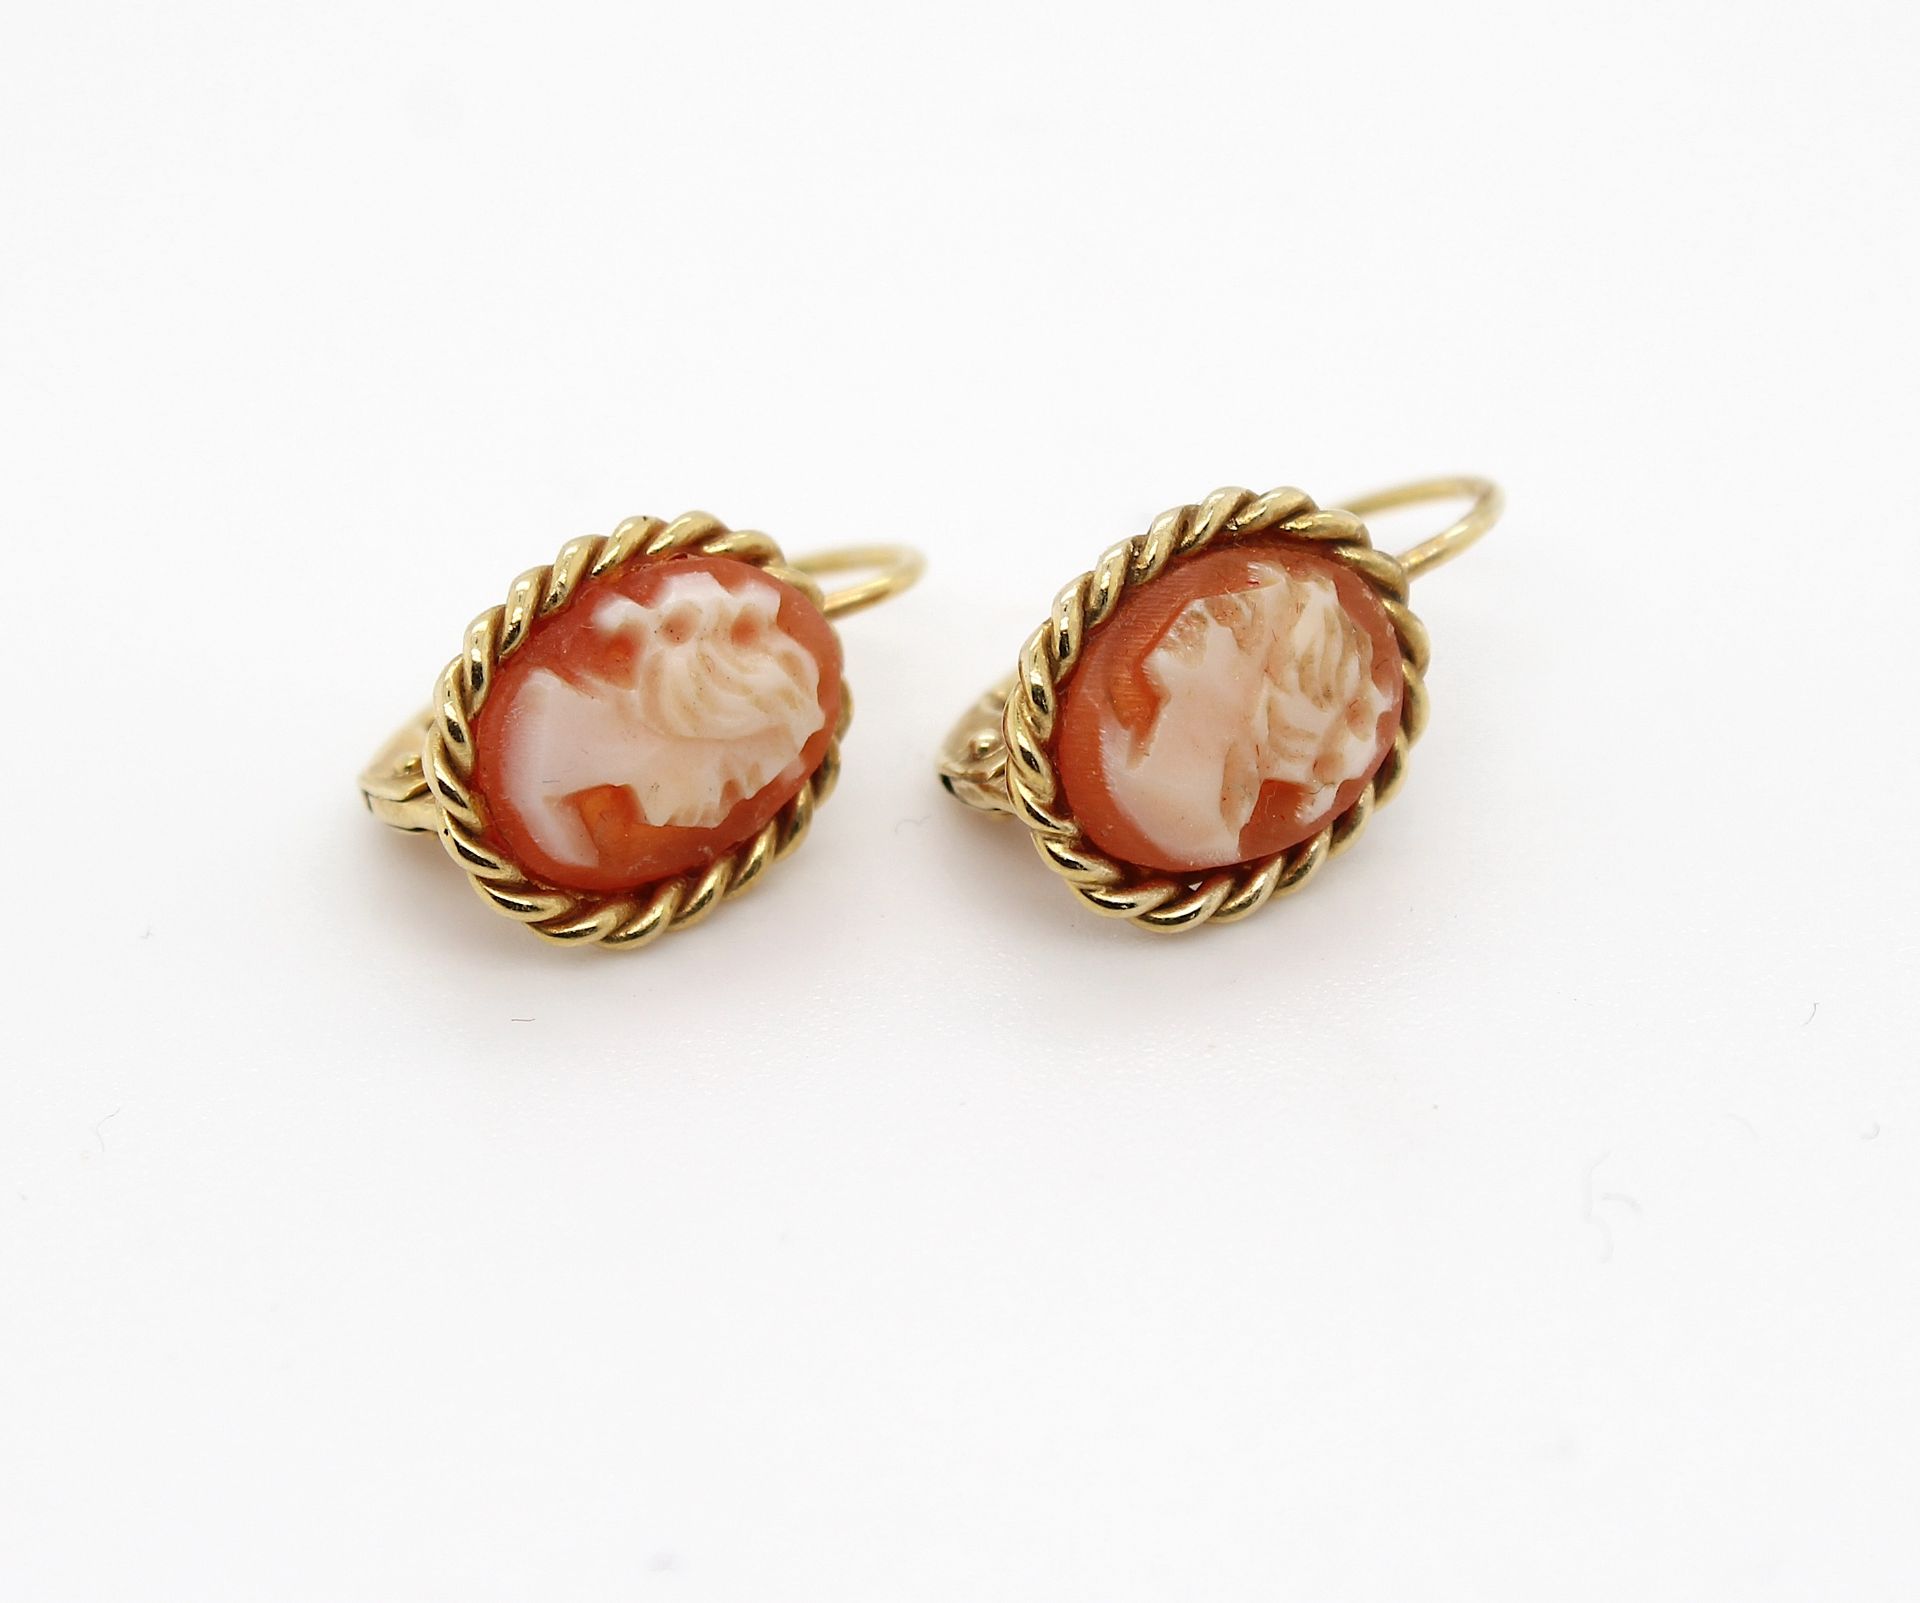 1 ring and a pair of earrings with shell gemstones - Image 4 of 5